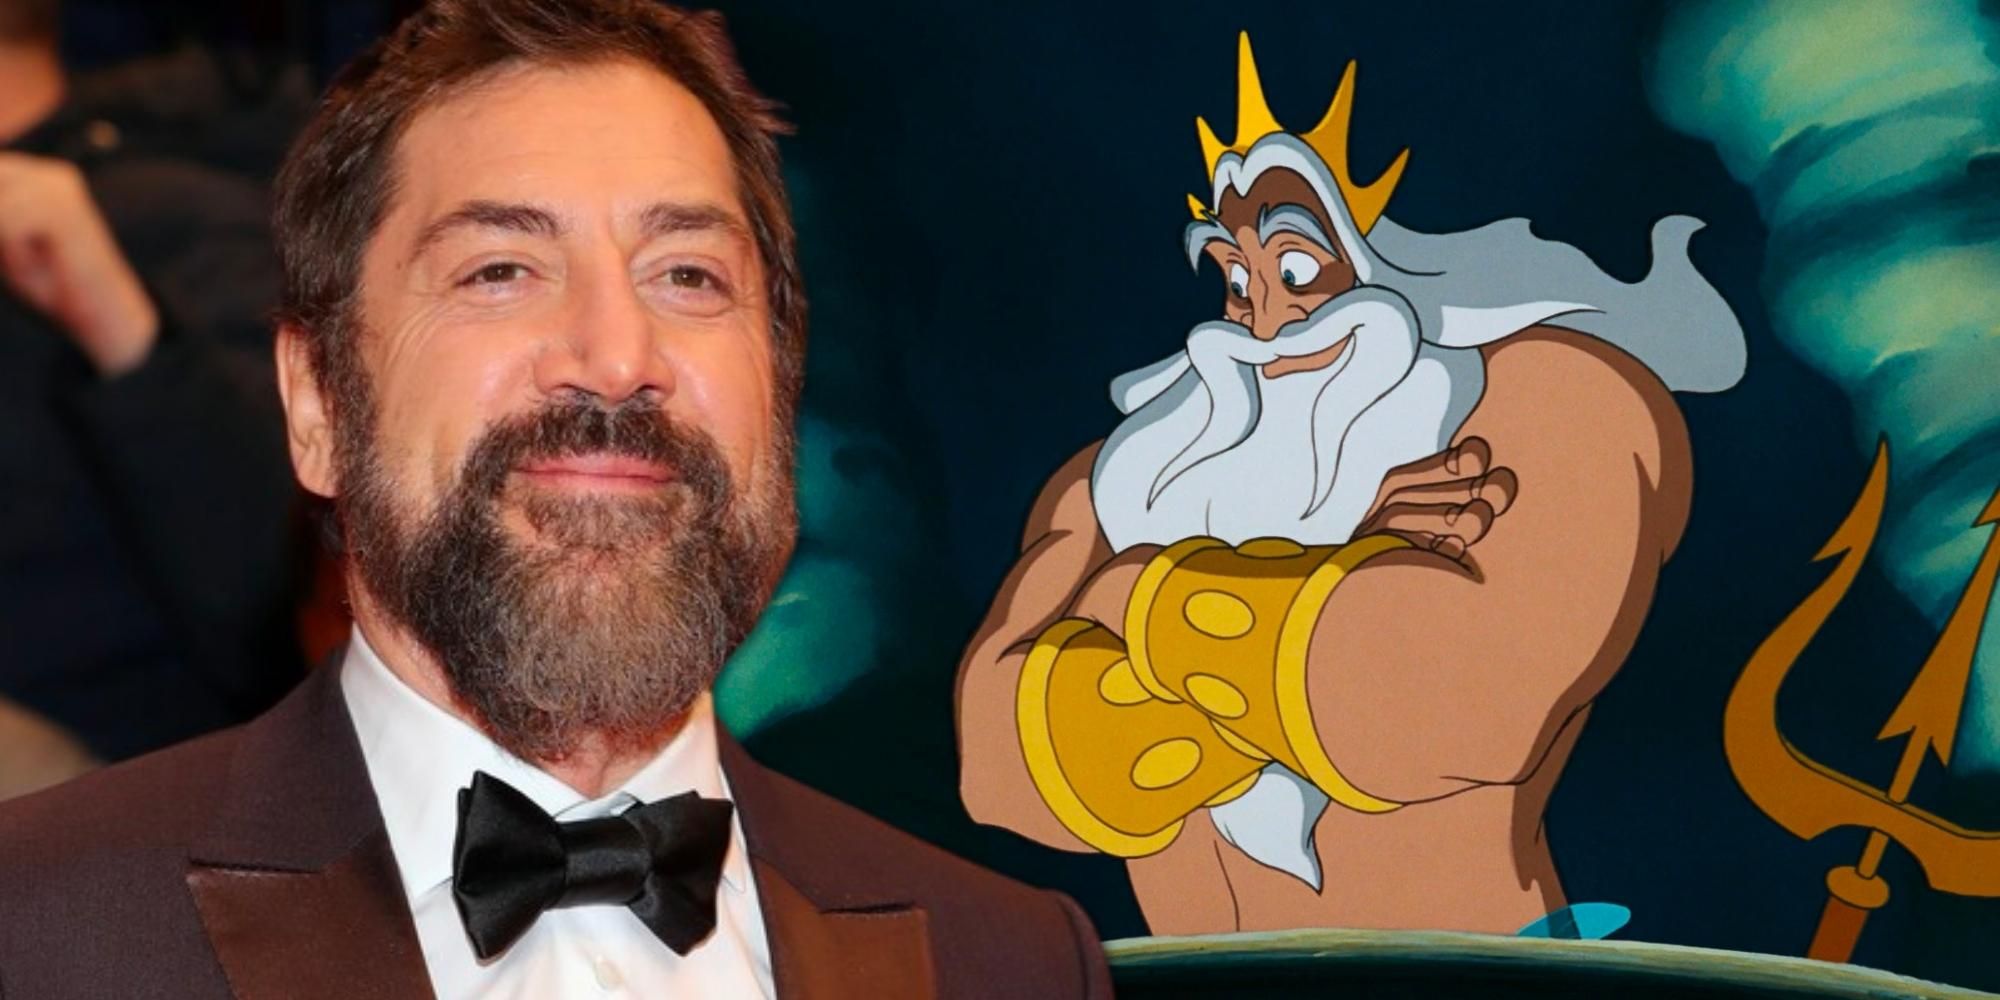 Javier Bardem in front of a still of King Triton from the Disney animated film the Little Mermaid